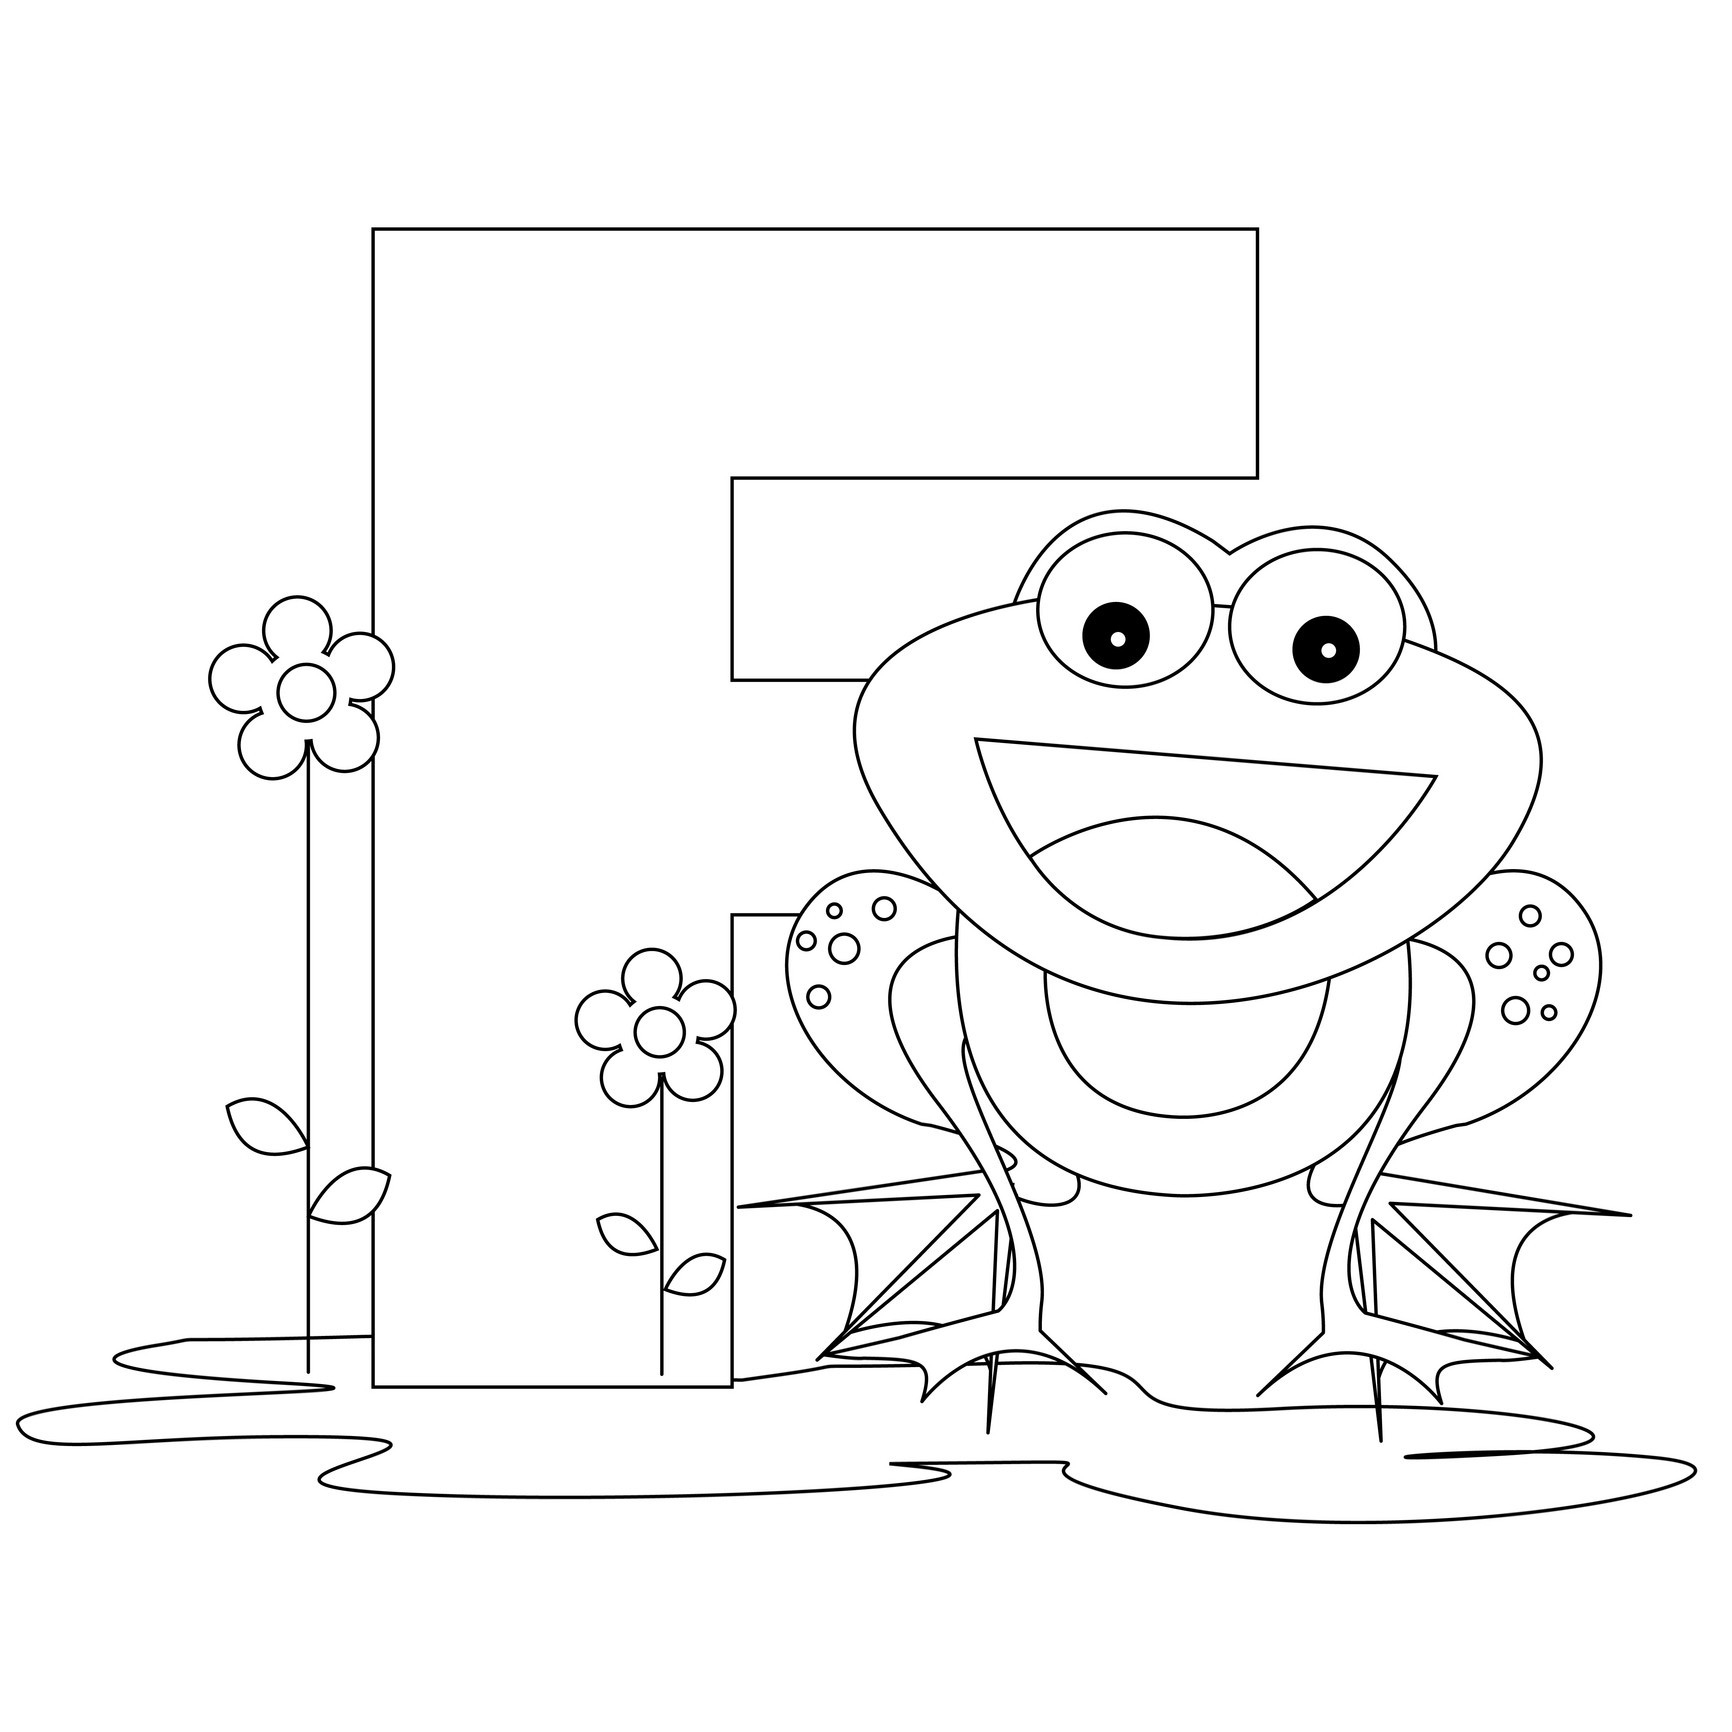  Printable Coloring Pages Letters 3